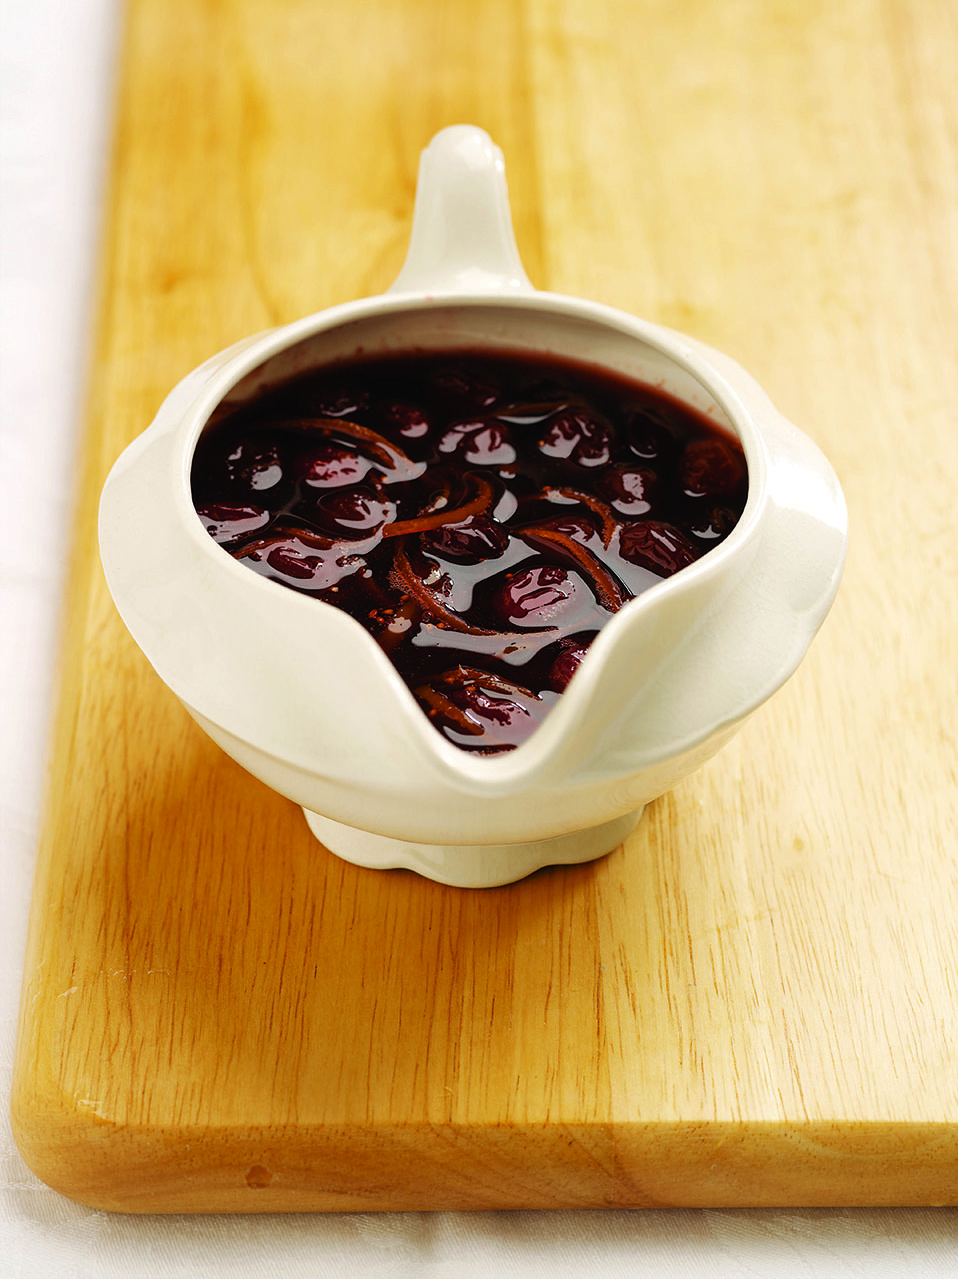 Cumberland sauce with cranberries - delicious. magazine